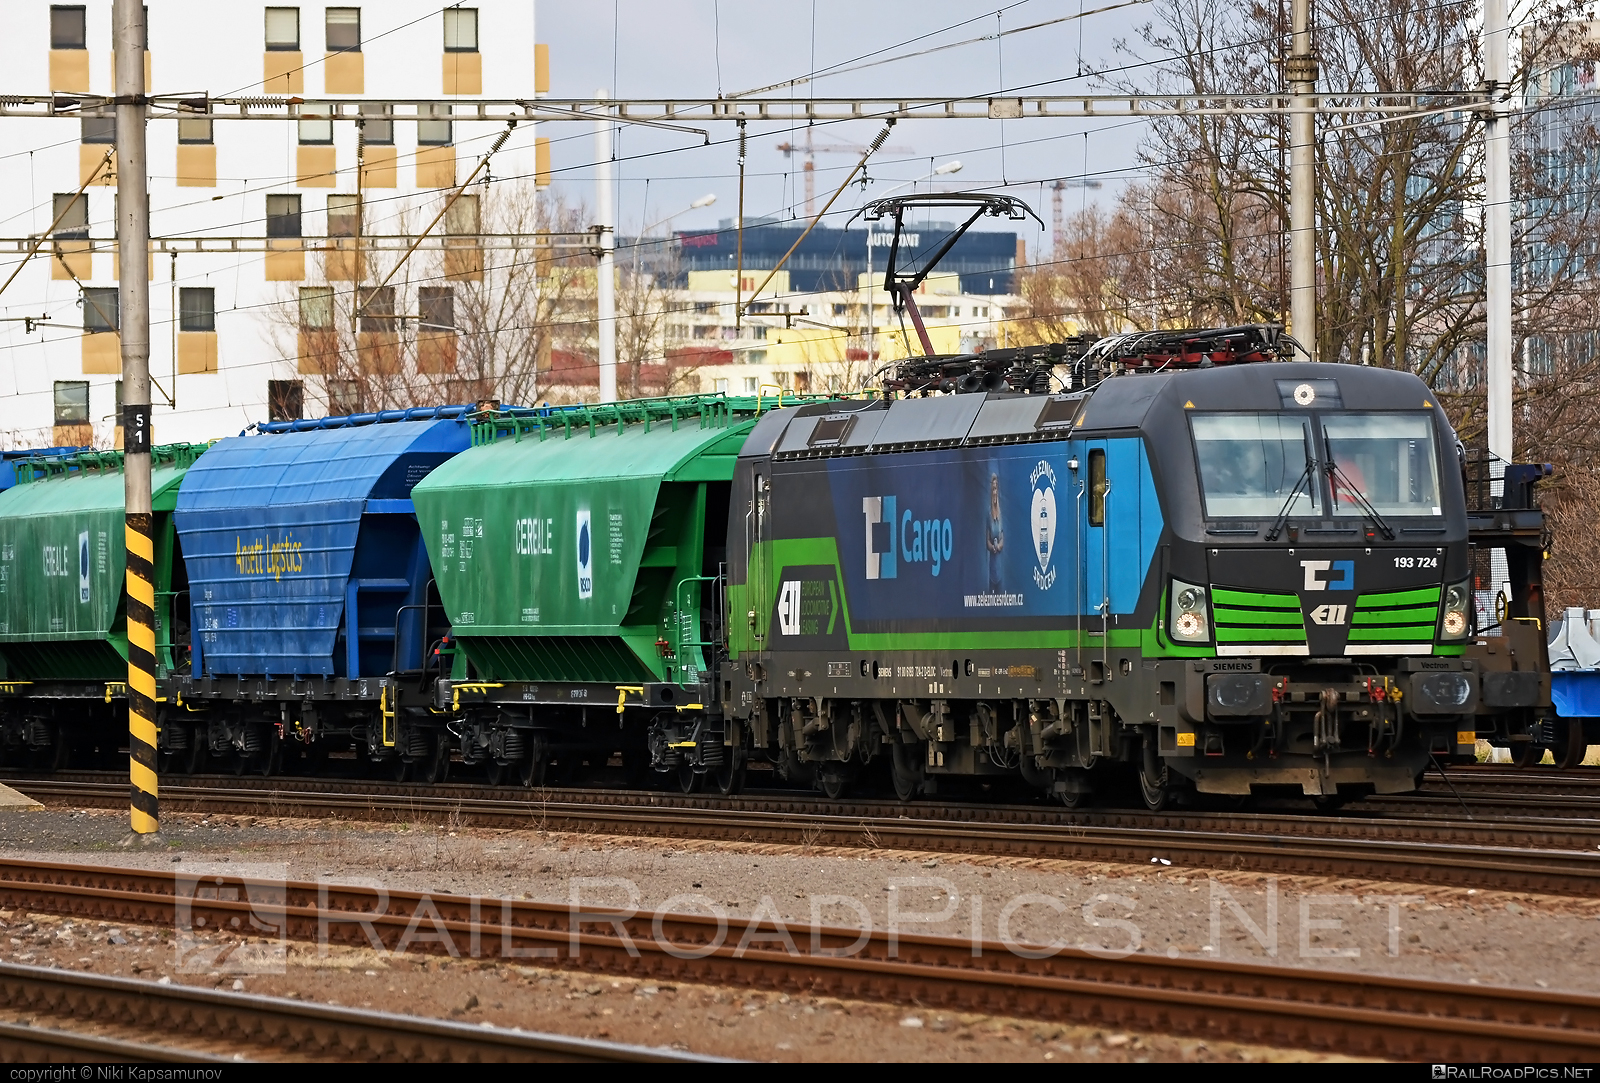 Siemens Vectron MS - 193 724 operated by ČD Cargo, a.s. #cdcargo #ell #ellgermany #eloc #europeanlocomotiveleasing #hopperwagon #siemens #siemensVectron #siemensVectronMS #vectron #vectronMS